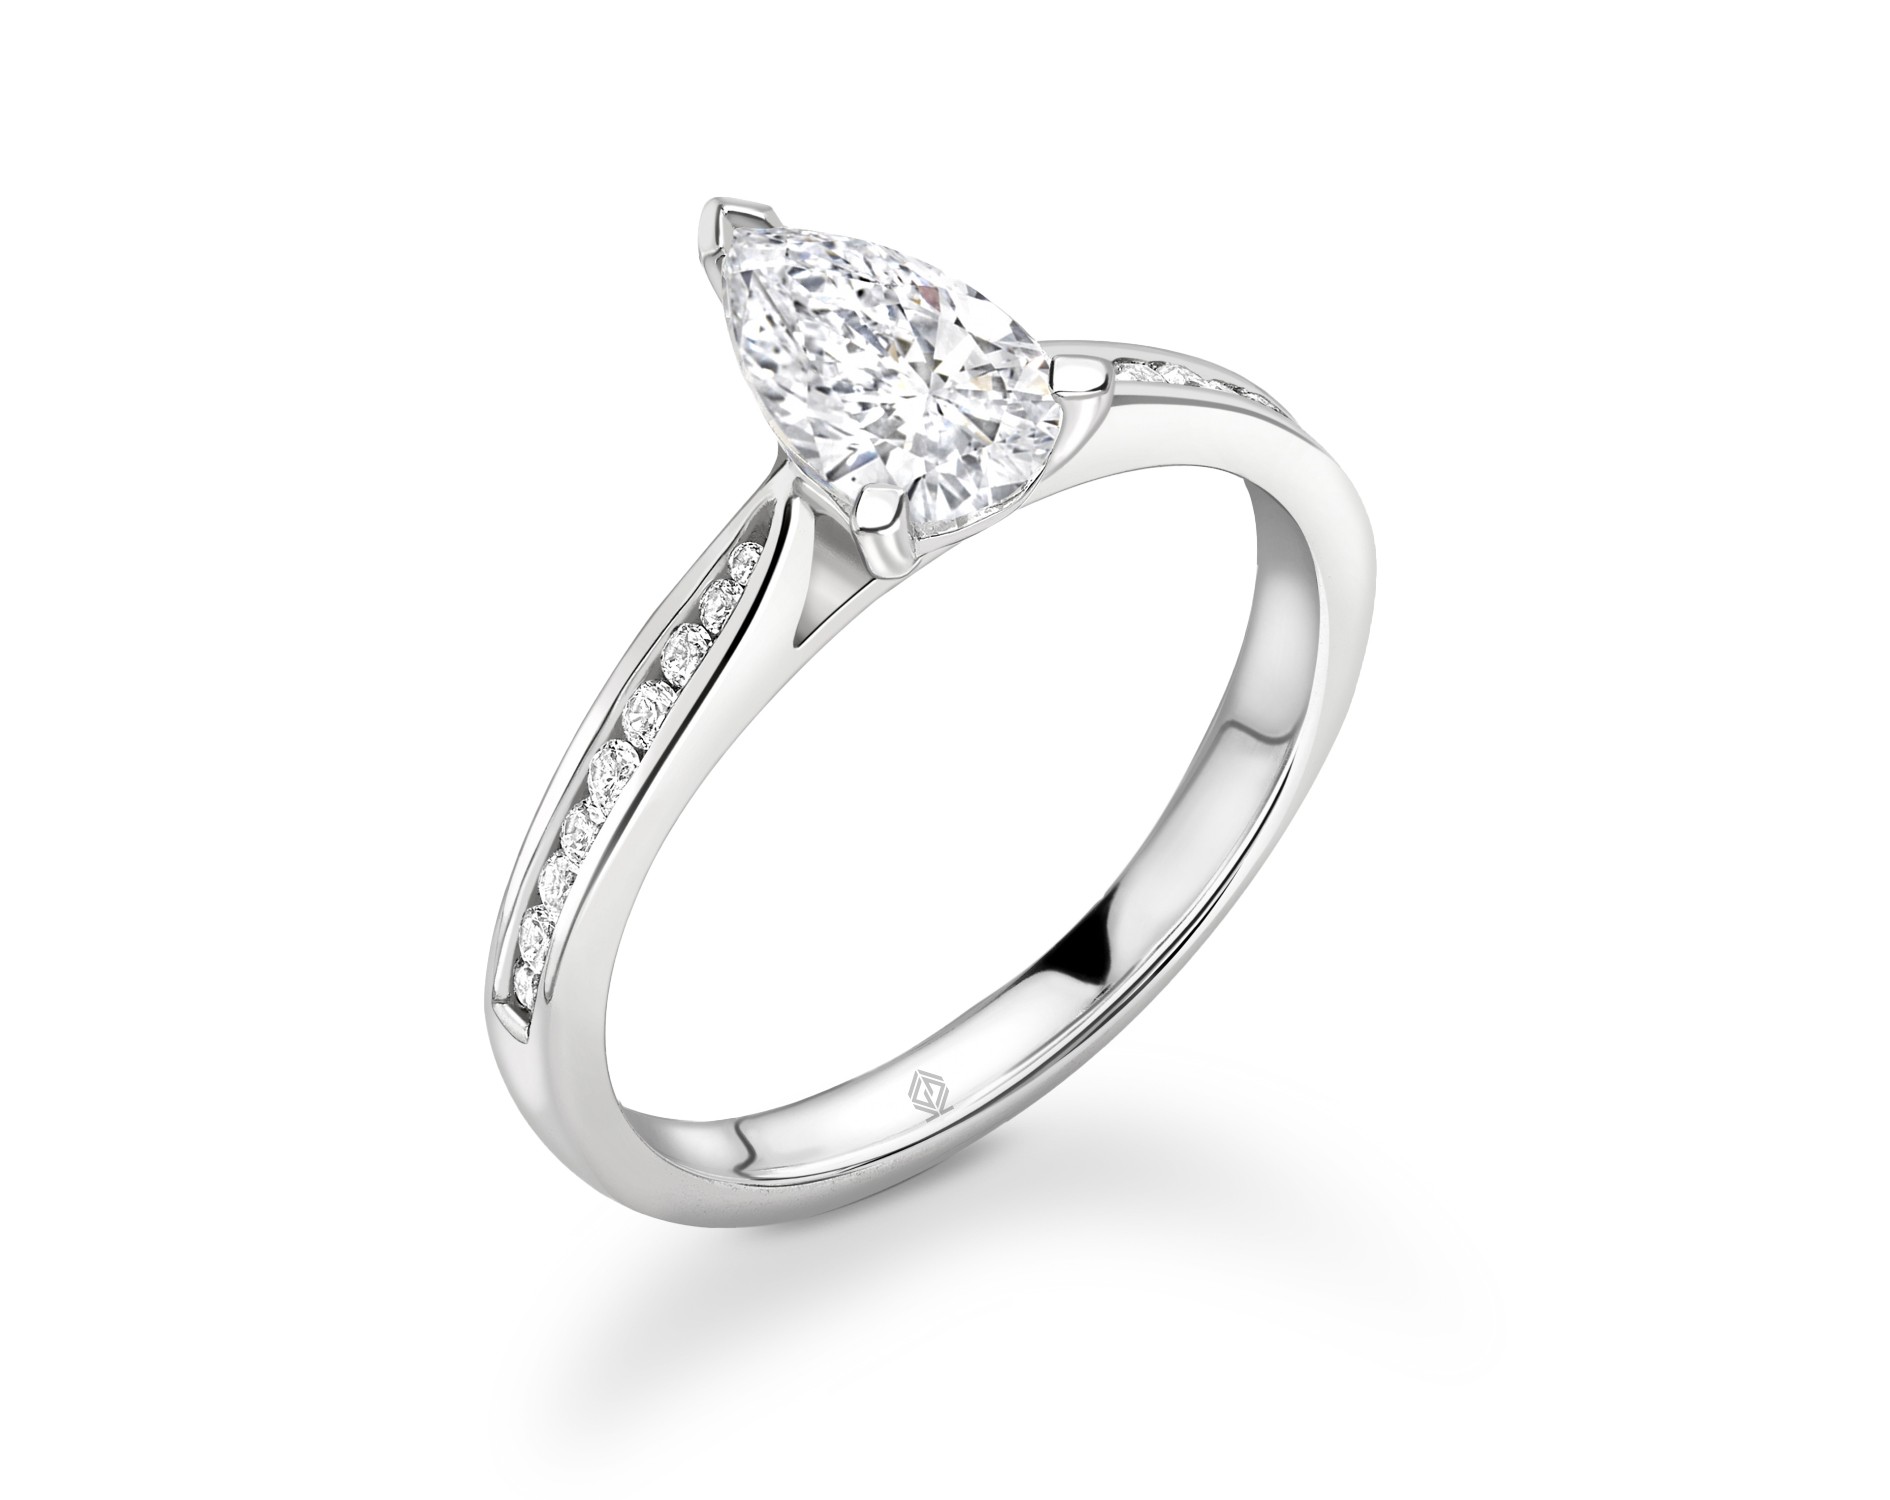 18K WHITE GOLD PEAR CUT DIAMOND ENGAGEMENT RING WITH SIDE STONES CHANNEL SET